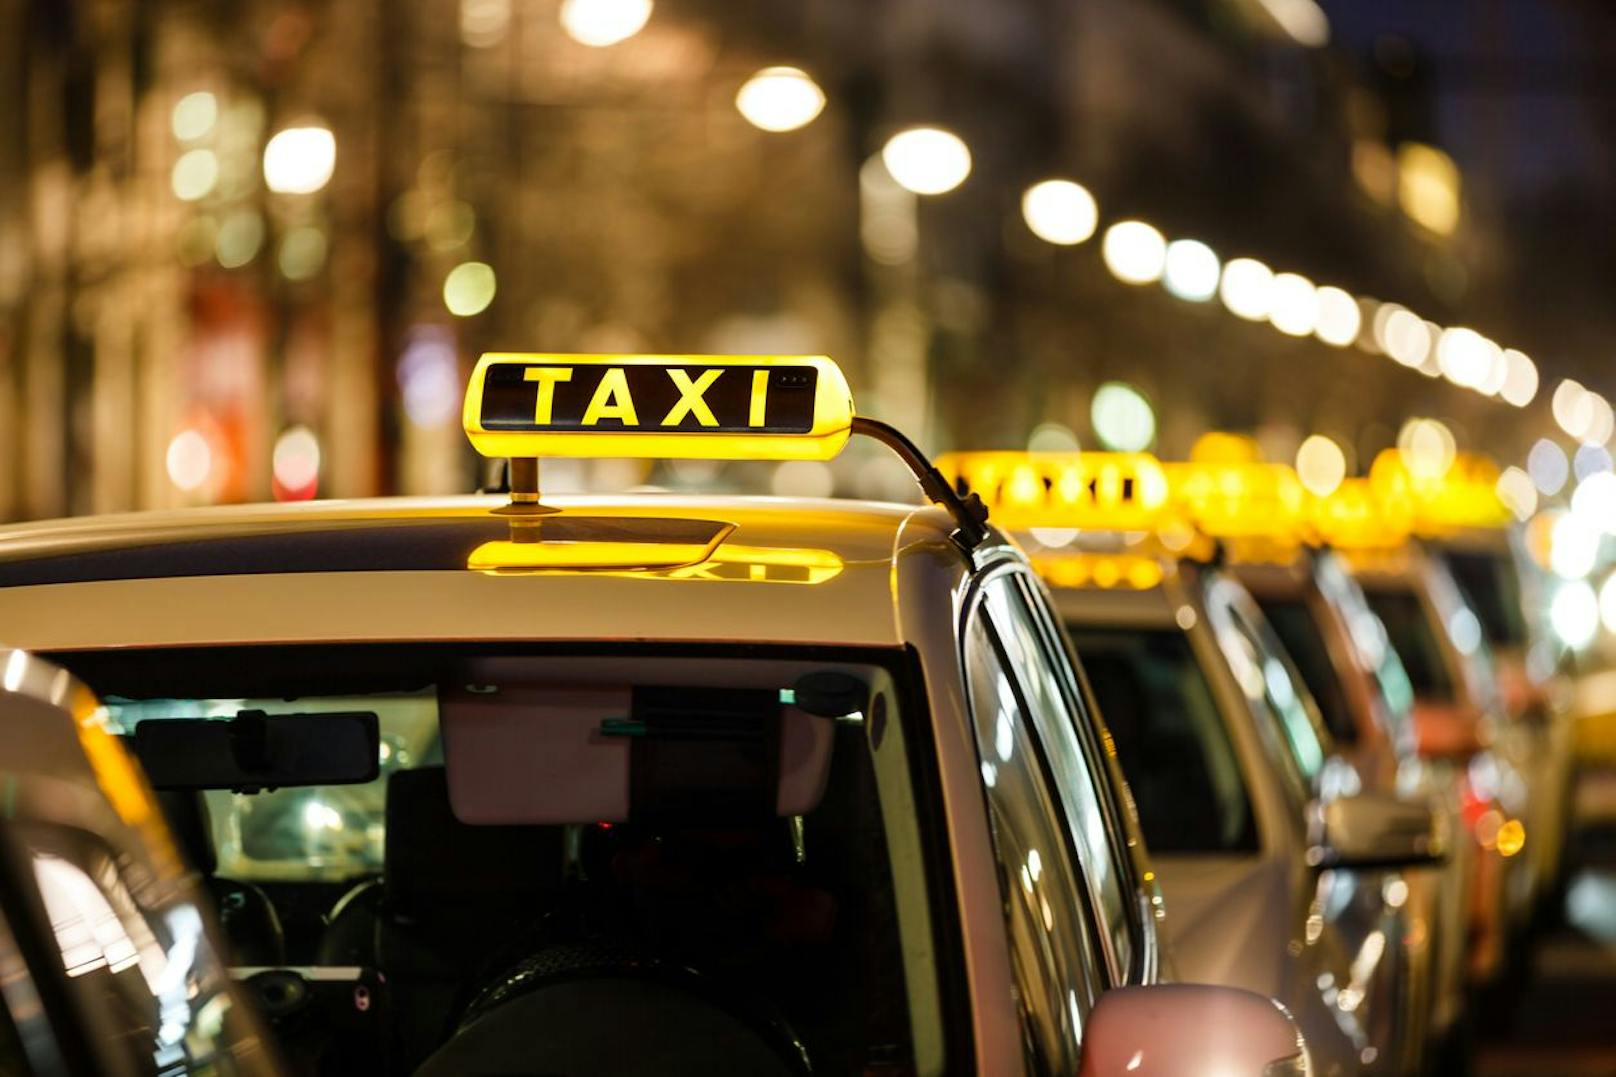 Taxis waiting in a row.